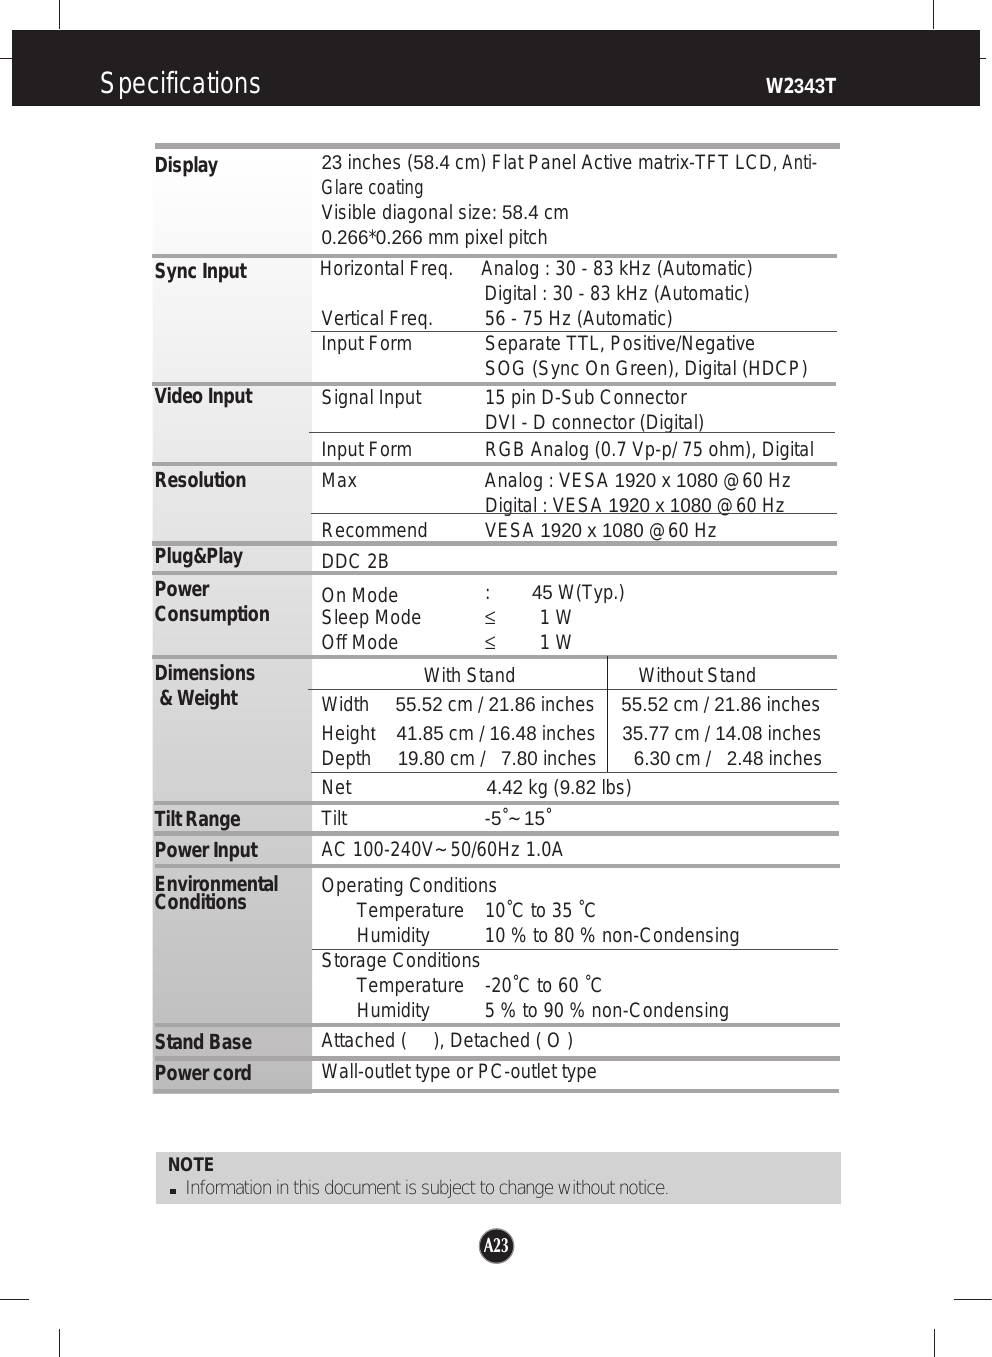 Specifications                                                                     W2343TNOTEInformation in this document is subject to change without notice.DisplaySync InputVideo InputResolutionPlug&amp;PlayPowerConsumptionDimensions&amp; WeightTilt RangePower InputEnvironmentalConditionsStand Base Power cord 23 inches (58.4 cm) Flat Panel Active matrix-TFT LCD, Anti-Glare coatingVisible diagonal size: 58.4 cm0.266*0.266 mm pixel pitchHorizontal Freq. Analog : 30 - 83 kHz (Automatic)Digital : 30 - 83 kHz (Automatic)Vertical Freq. 56 - 75 Hz (Automatic)Input Form Separate TTL, Positive/NegativeSOG (Sync On Green), Digital (HDCP)Signal Input 15 pin D-Sub ConnectorDVI - D connector (Digital)Input Form RGB Analog (0.7 Vp-p/ 75 ohm), DigitalMax Analog : VESA 1920 x 1080 @60 HzDigital : VESA 1920 x 1080 @60 HzRecommend VESA 1920 x 1080 @60 HzDDC 2B   On Mode :        45 W(Typ.)Sleep Mode ≤1 WOff Mode ≤1 WWith Stand Without StandWidth     55.52 cm / 21.86 inches     55.52 cm / 21.86 inchesHeight    41.85 cm / 16.48 inches     35.77 cm / 14.08 inches Depth     19.80 cm /   7.80 inches       6.30 cm /   2.48 inchesNet                          4.42 kg (9.82 lbs)Tilt -5˚~ 15˚AC 100-240V~ 50/60Hz 1.0A Operating ConditionsTemperature 10˚C to 35 ˚CHumidity 10 % to 80 % non-CondensingStorage ConditionsTemperature -20˚C to 60 ˚C Humidity 5 % to 90 % non-CondensingAttached (     ), Detached ( O )Wall-outlet type or PC-outlet typeA23A23